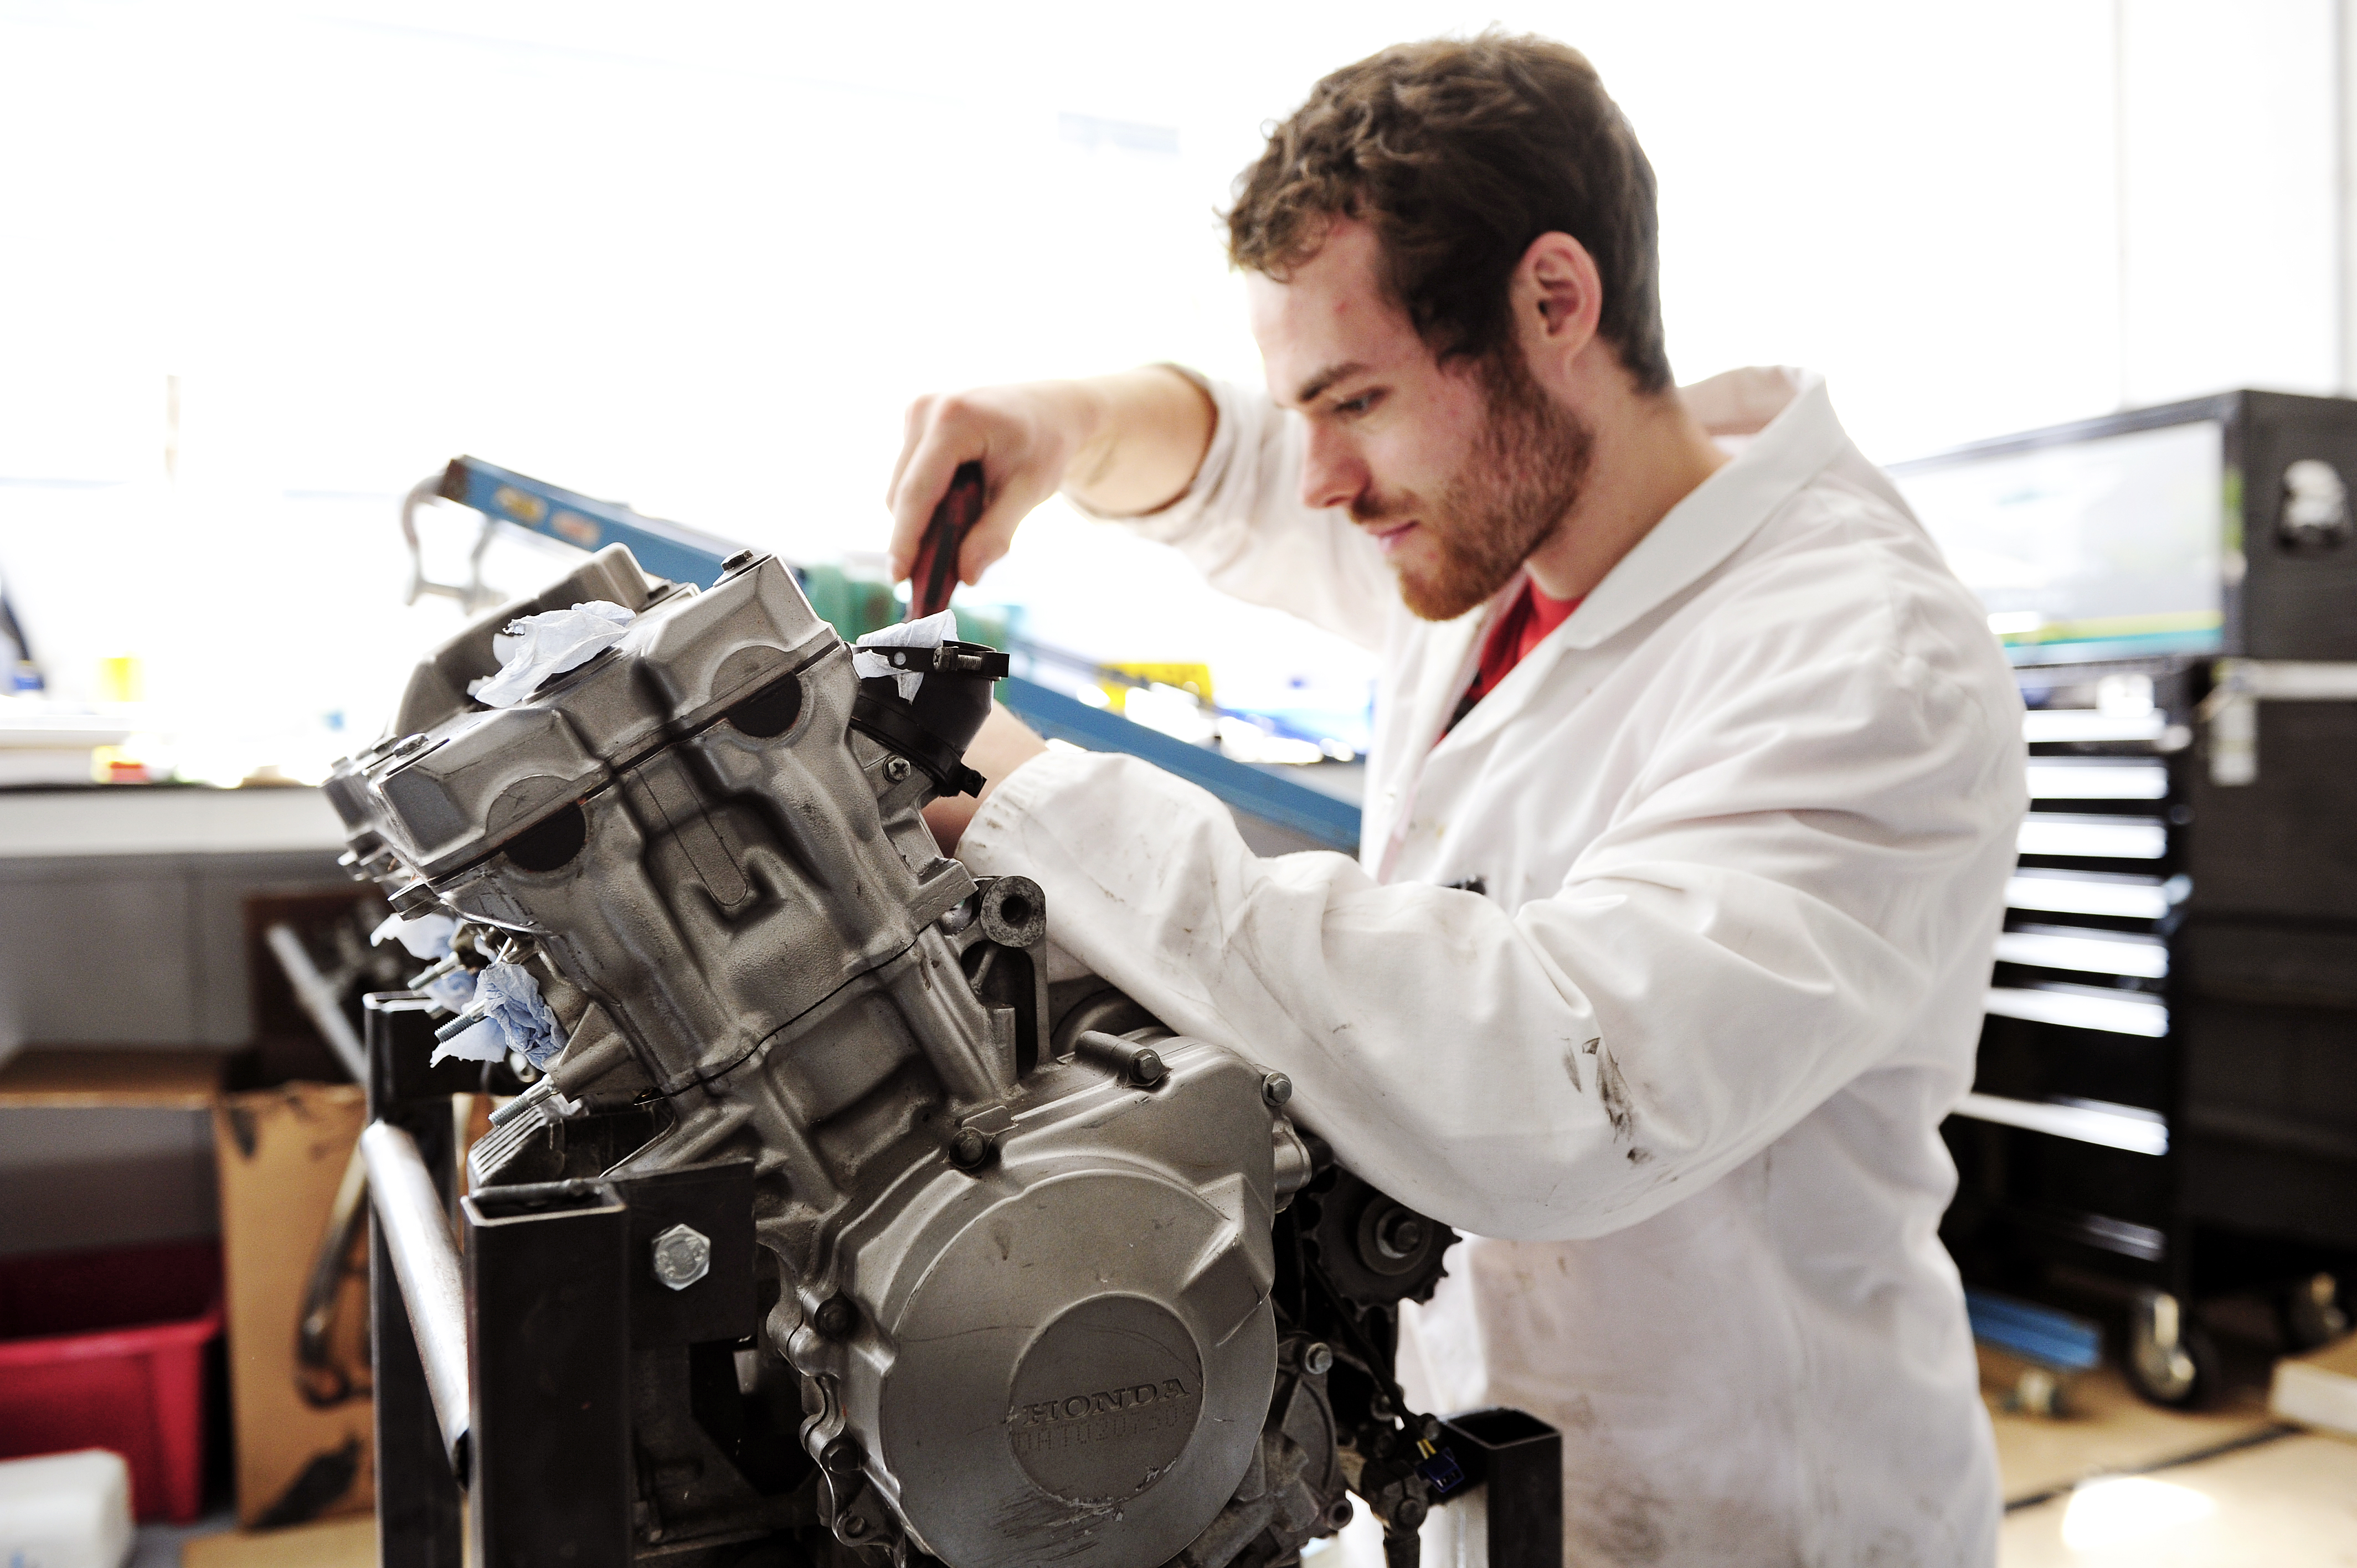 Engineering student in lab coat works on engine at University of Exeter